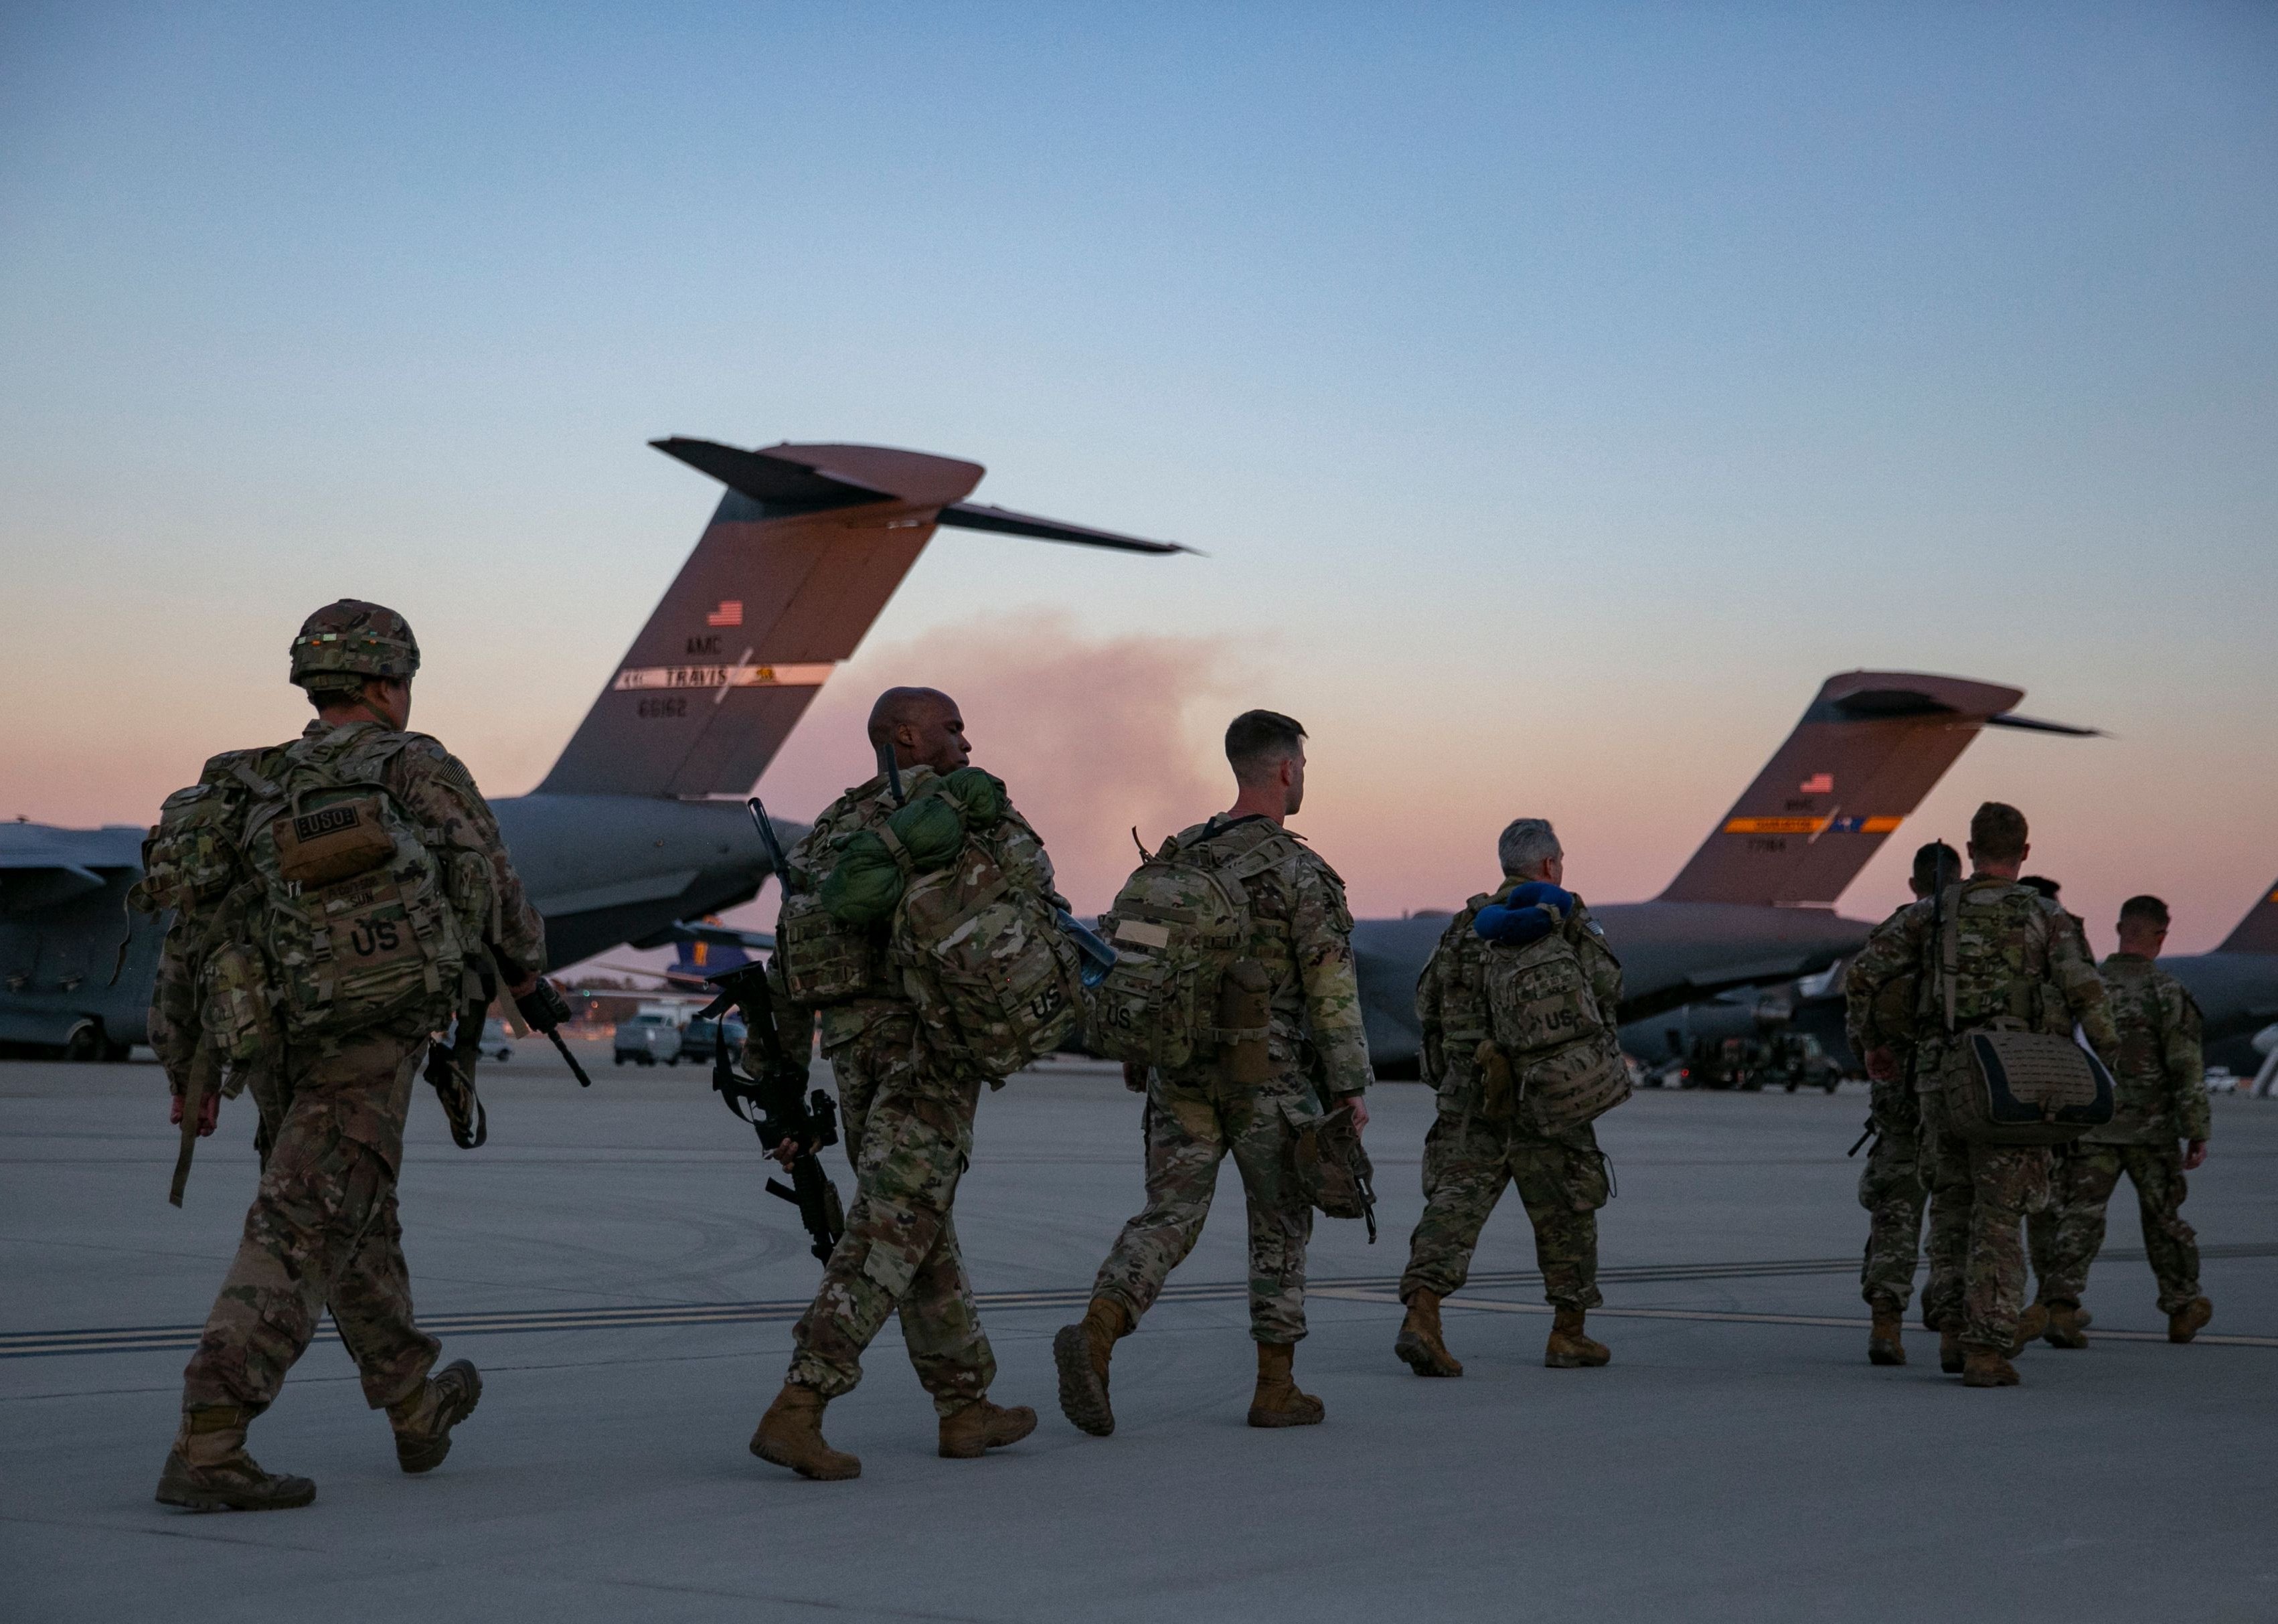 Soldiers of the 82nd Airborne Division walk to board a plane.